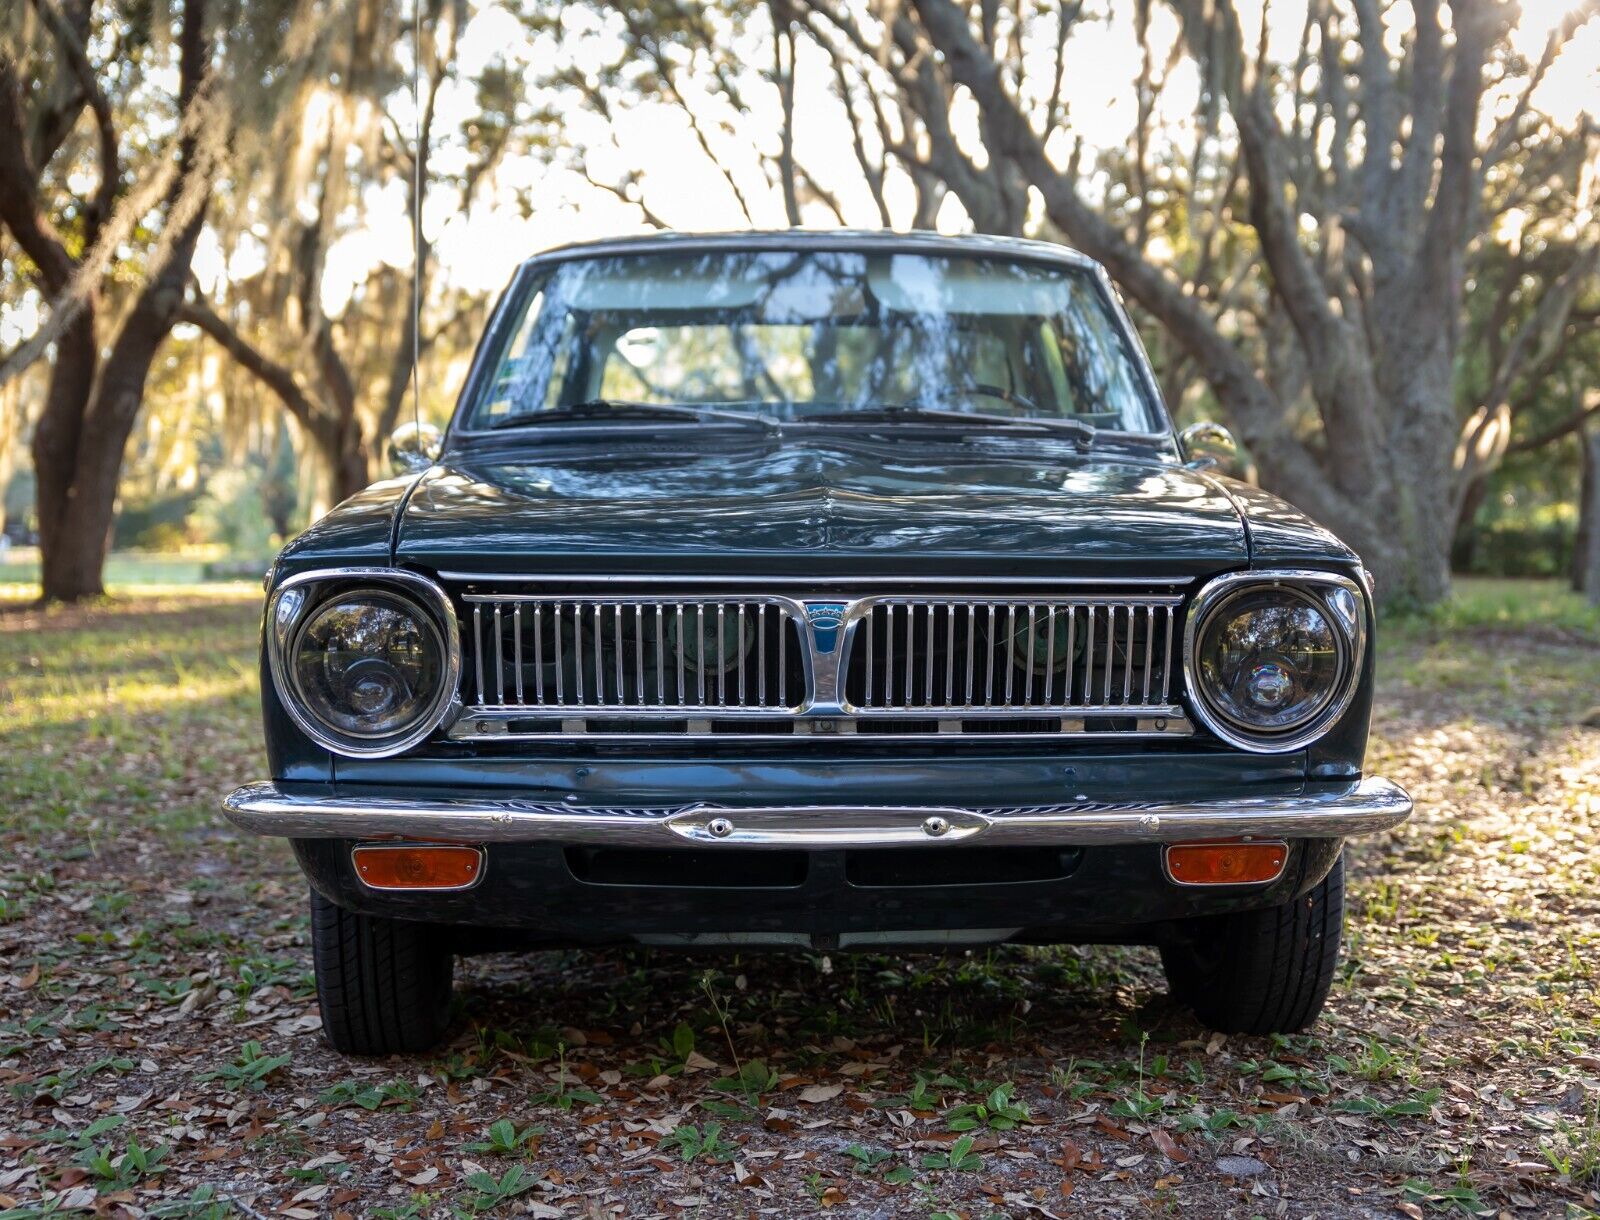 1969 Toyota Corolla - front grille, bumper, and headlights